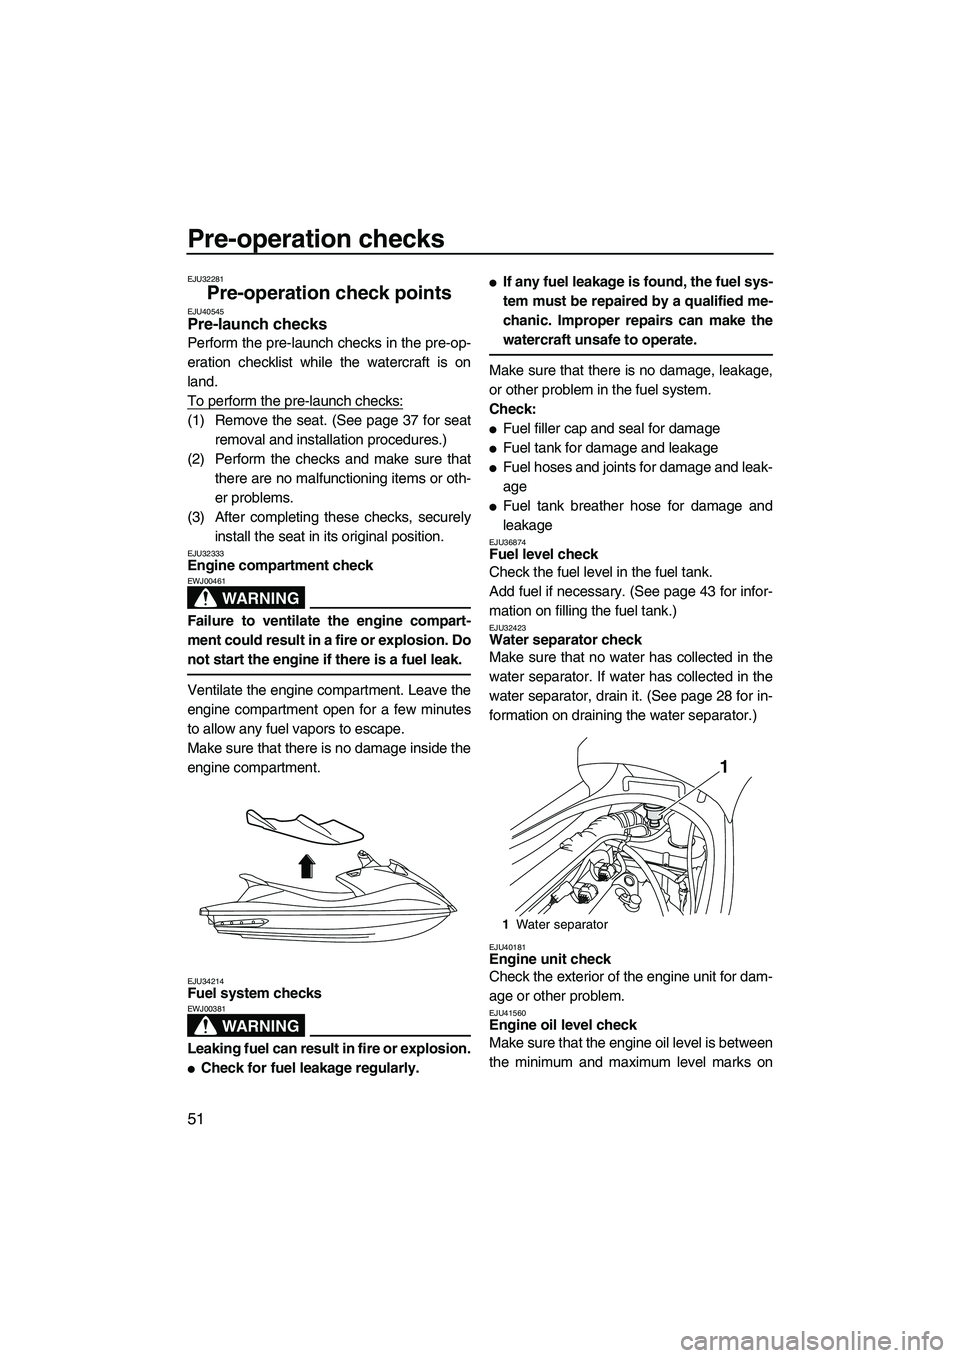 YAMAHA VX SPORT 2010  Owners Manual Pre-operation checks
51
EJU32281
Pre-operation check points EJU40545Pre-launch checks 
Perform the pre-launch checks in the pre-op-
eration checklist while the watercraft is on
land.
To perform the pr